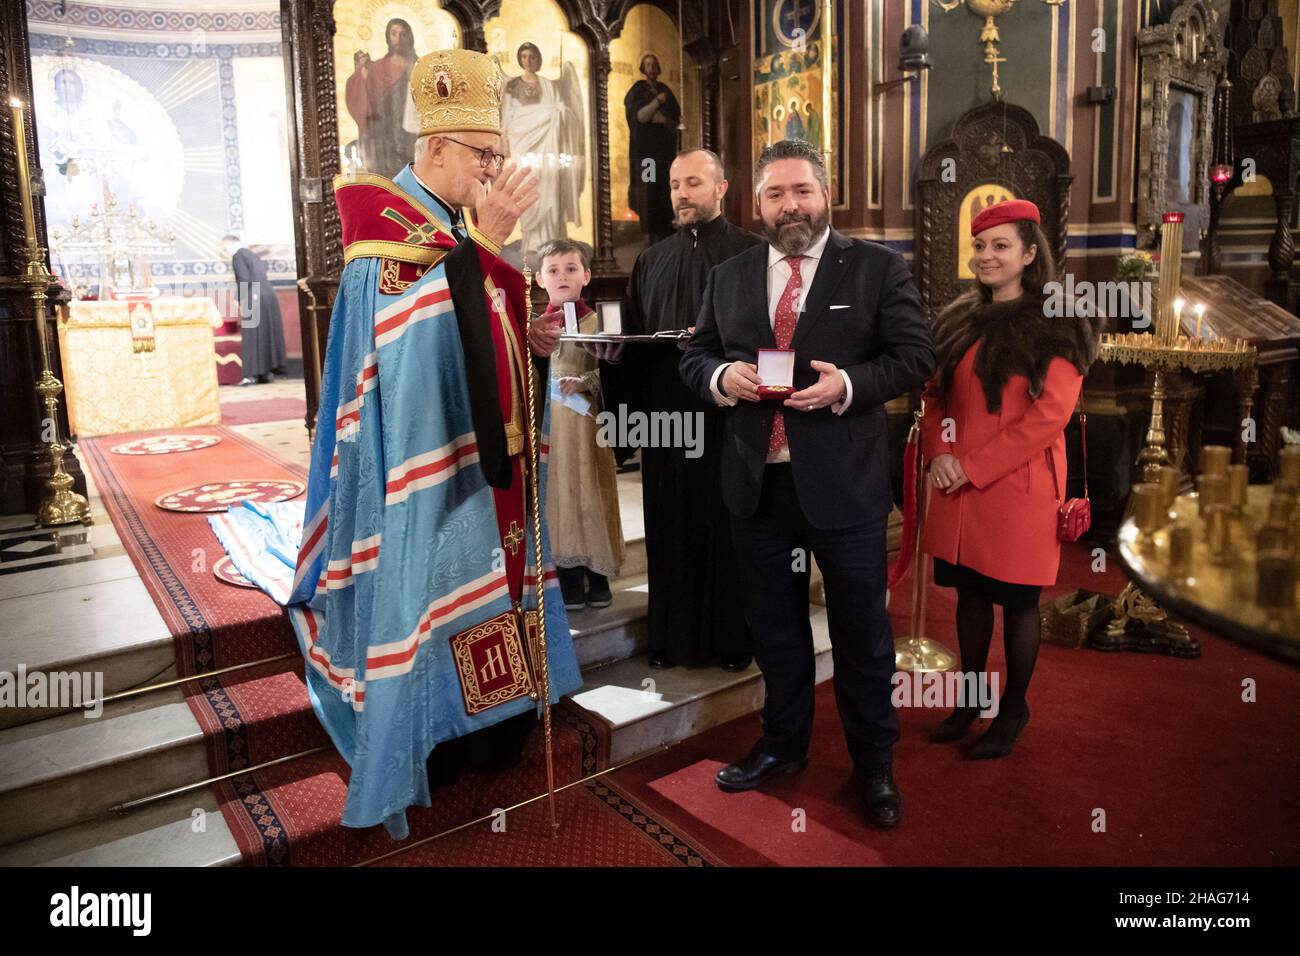 Grand Duke George Mikhailovich of Russia, (Georgi Mikhailovich Romanov) receives the order of Saint Alexander Nevsky by his Jean de Doubna, Archbishop of the Orthodox Churches of Russia at Saint Alexander Nevsky Cathedral, on December 10, 21 in Paris, France.Photo by David Niviere/ABACAPRESS.COM Stock Photo